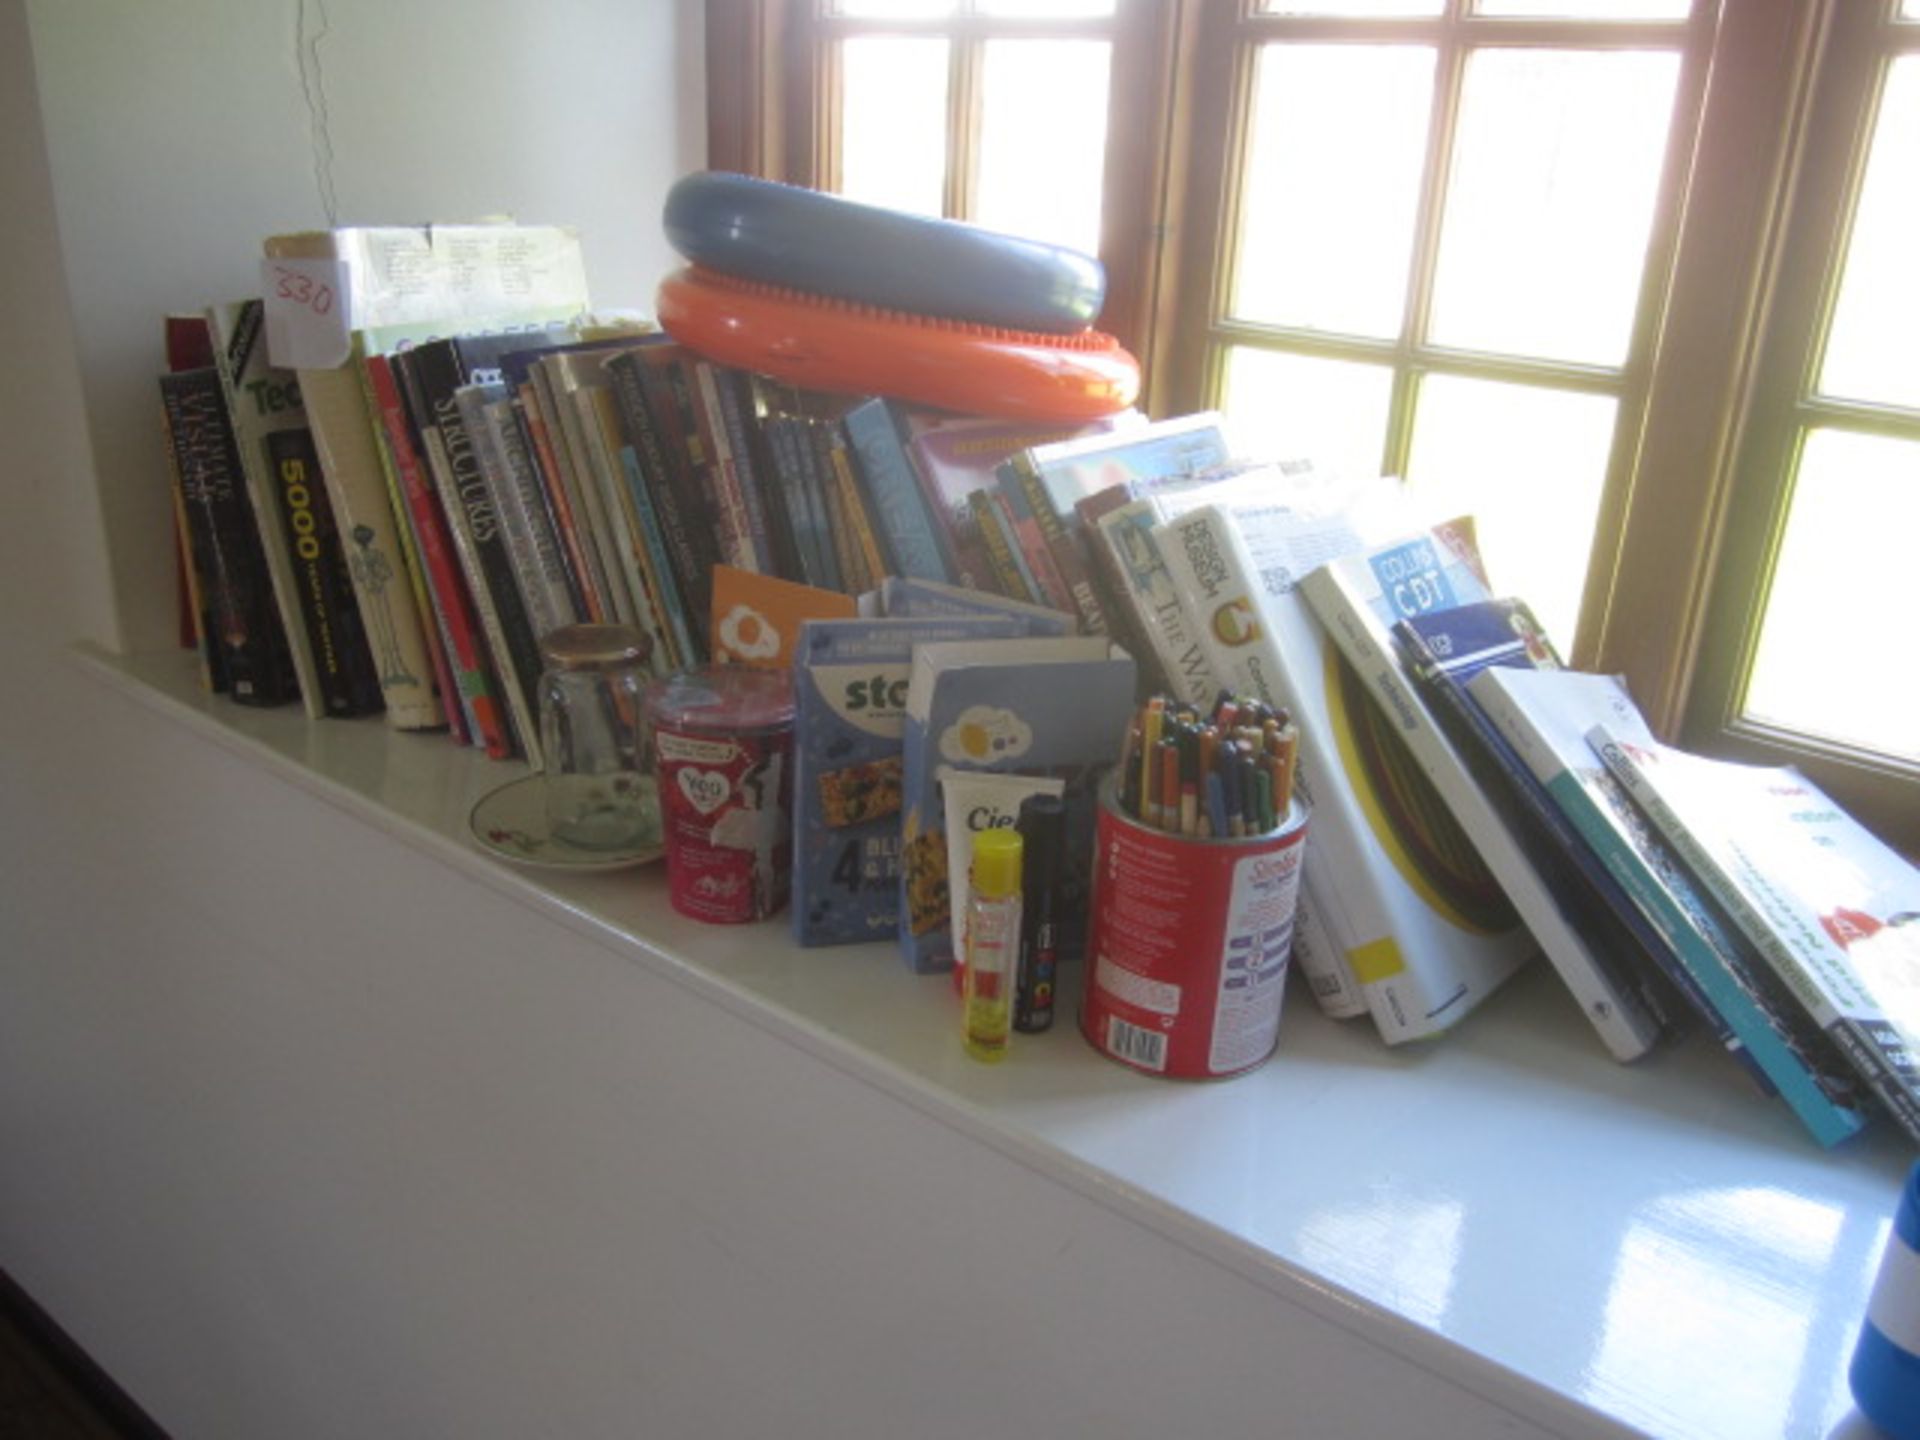 Wood effect storage unit with contents including pencils, colouring pencils, various books, - Image 6 of 11